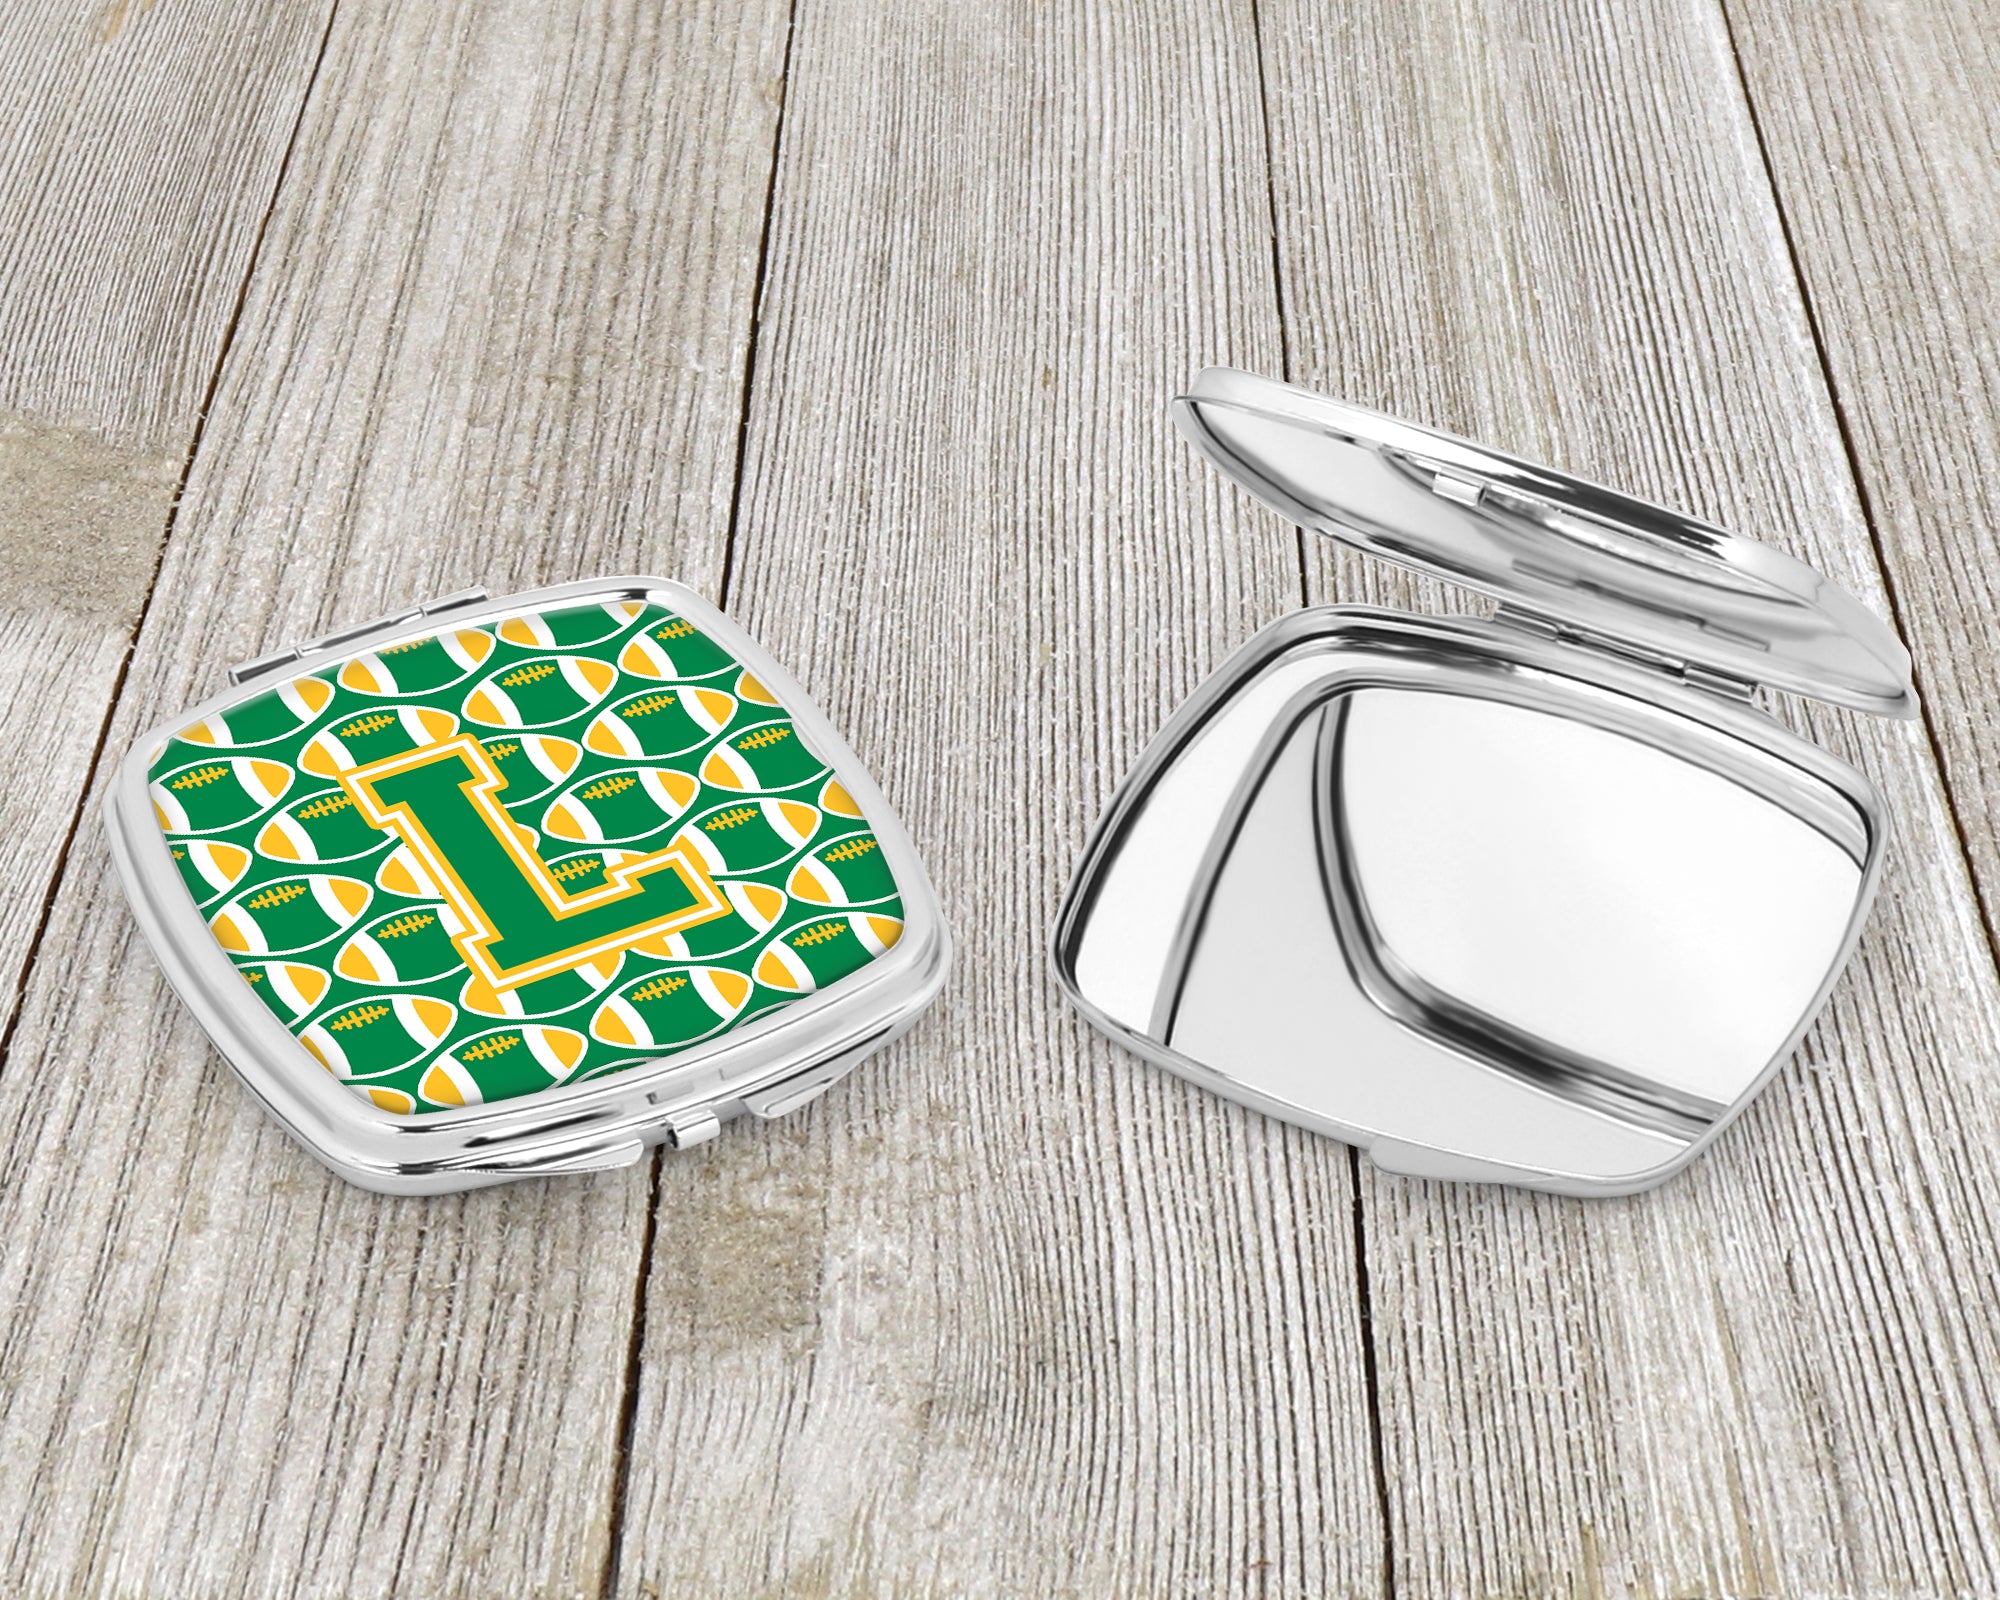 Letter L Football Green and Gold Compact Mirror CJ1069-LSCM  the-store.com.